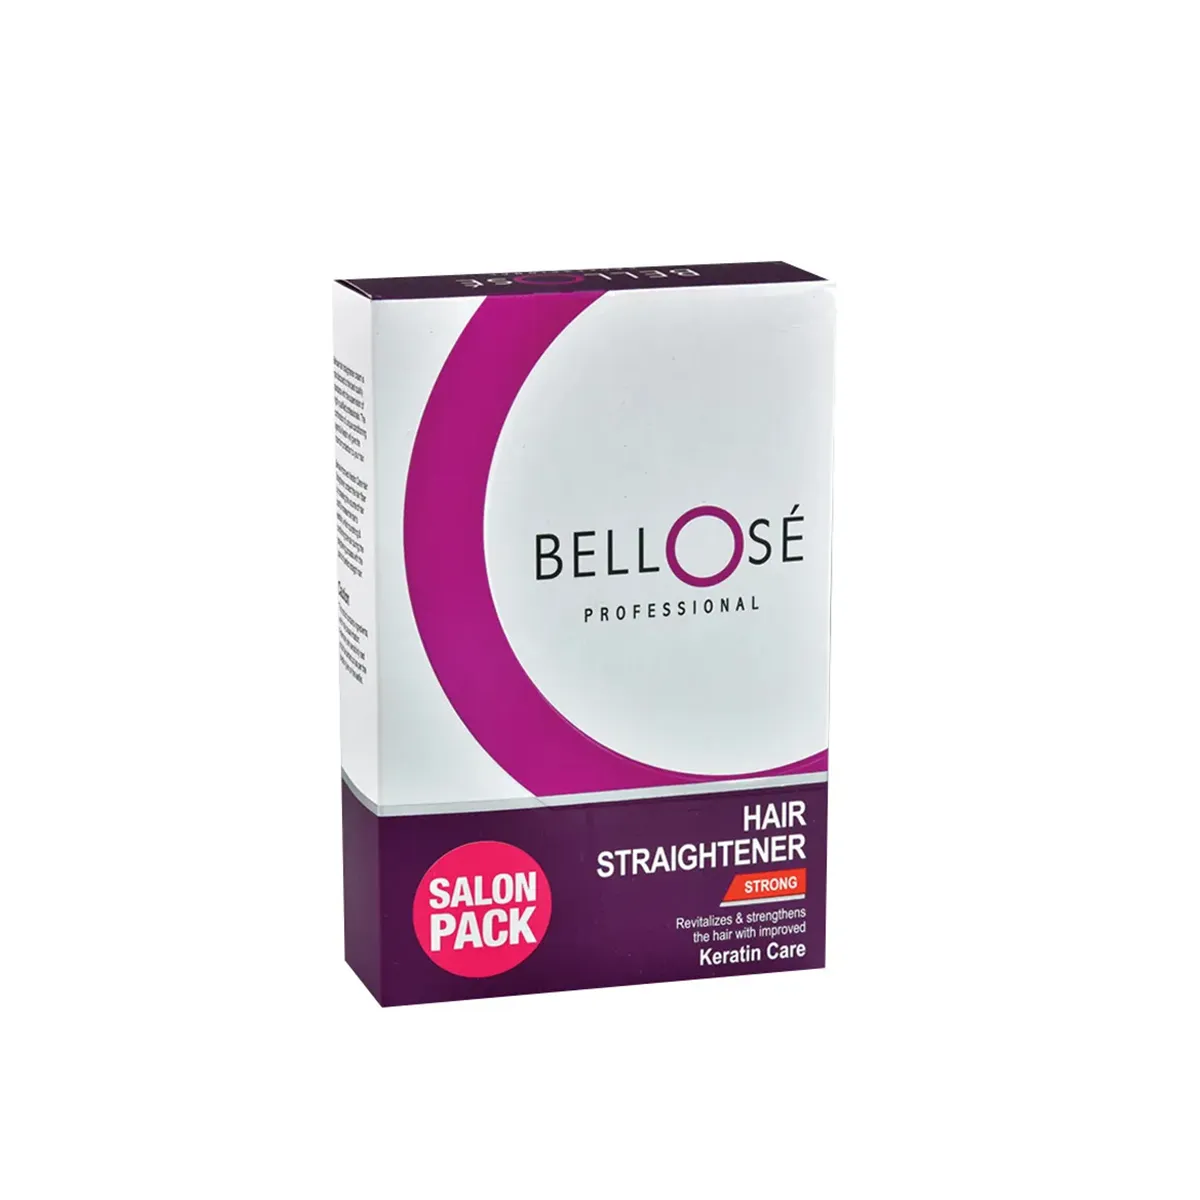 Bellose Hair Straightener Double Pack - Strong 160ml